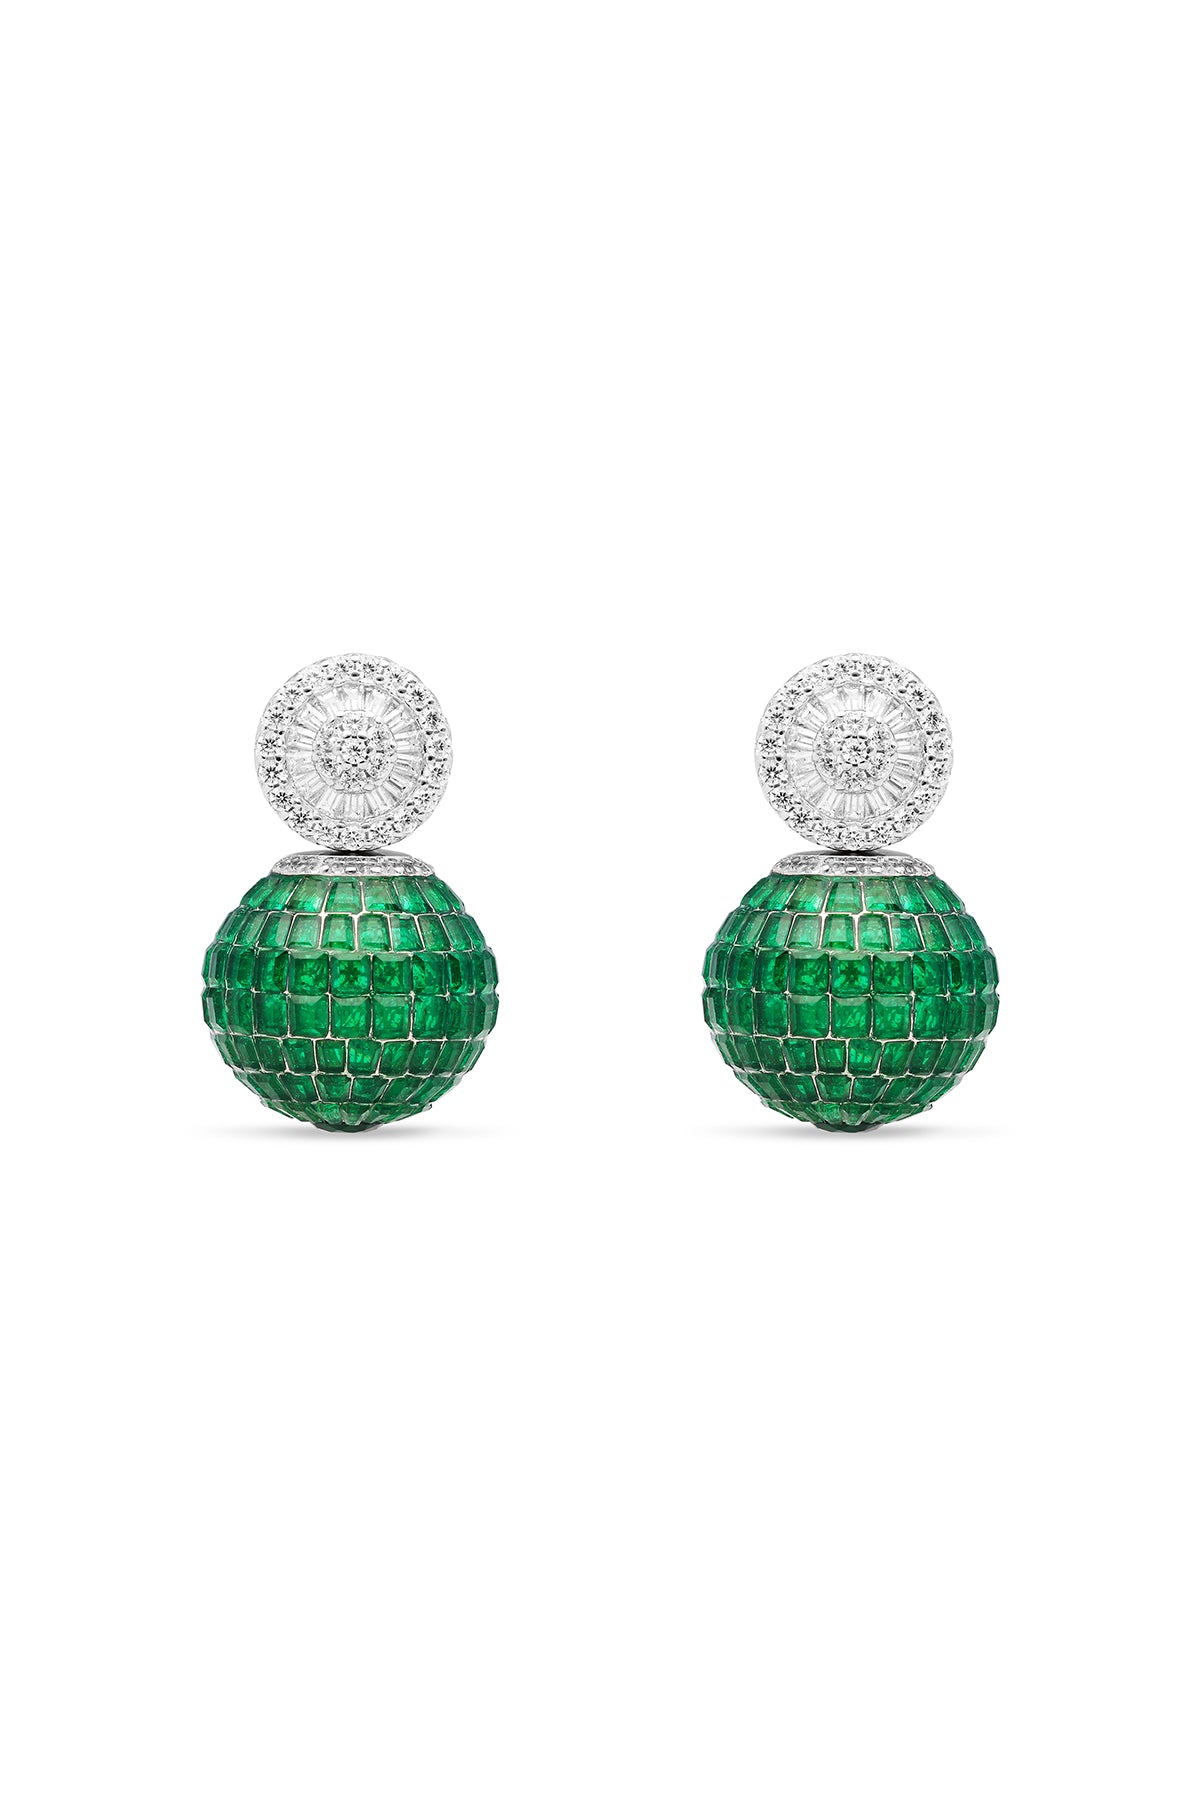 The Whimsy of the Bee Emerald Green Earrings